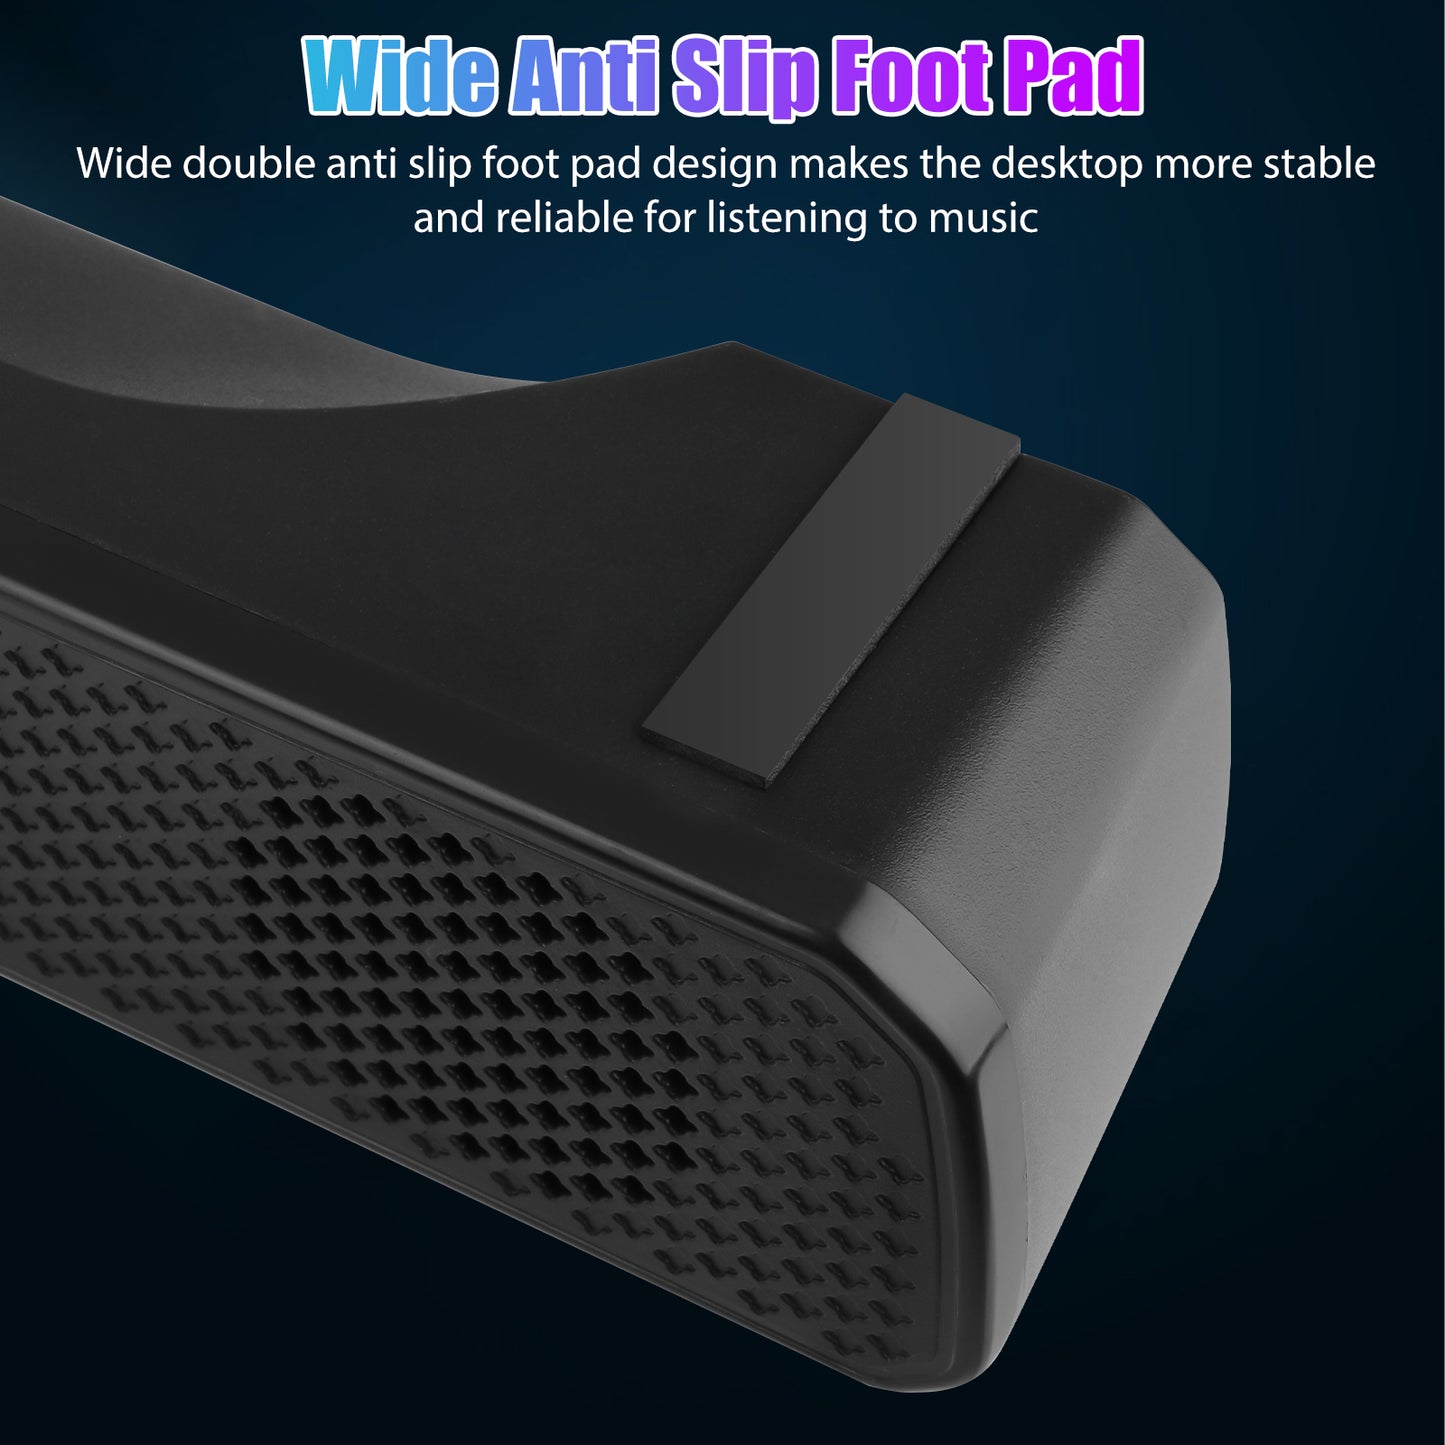 RGB 3.5mm Computer Speaker Sound Bar – 6W Wired Bass Audio with USB Power, for Gaming, Home, Outdoor, Party